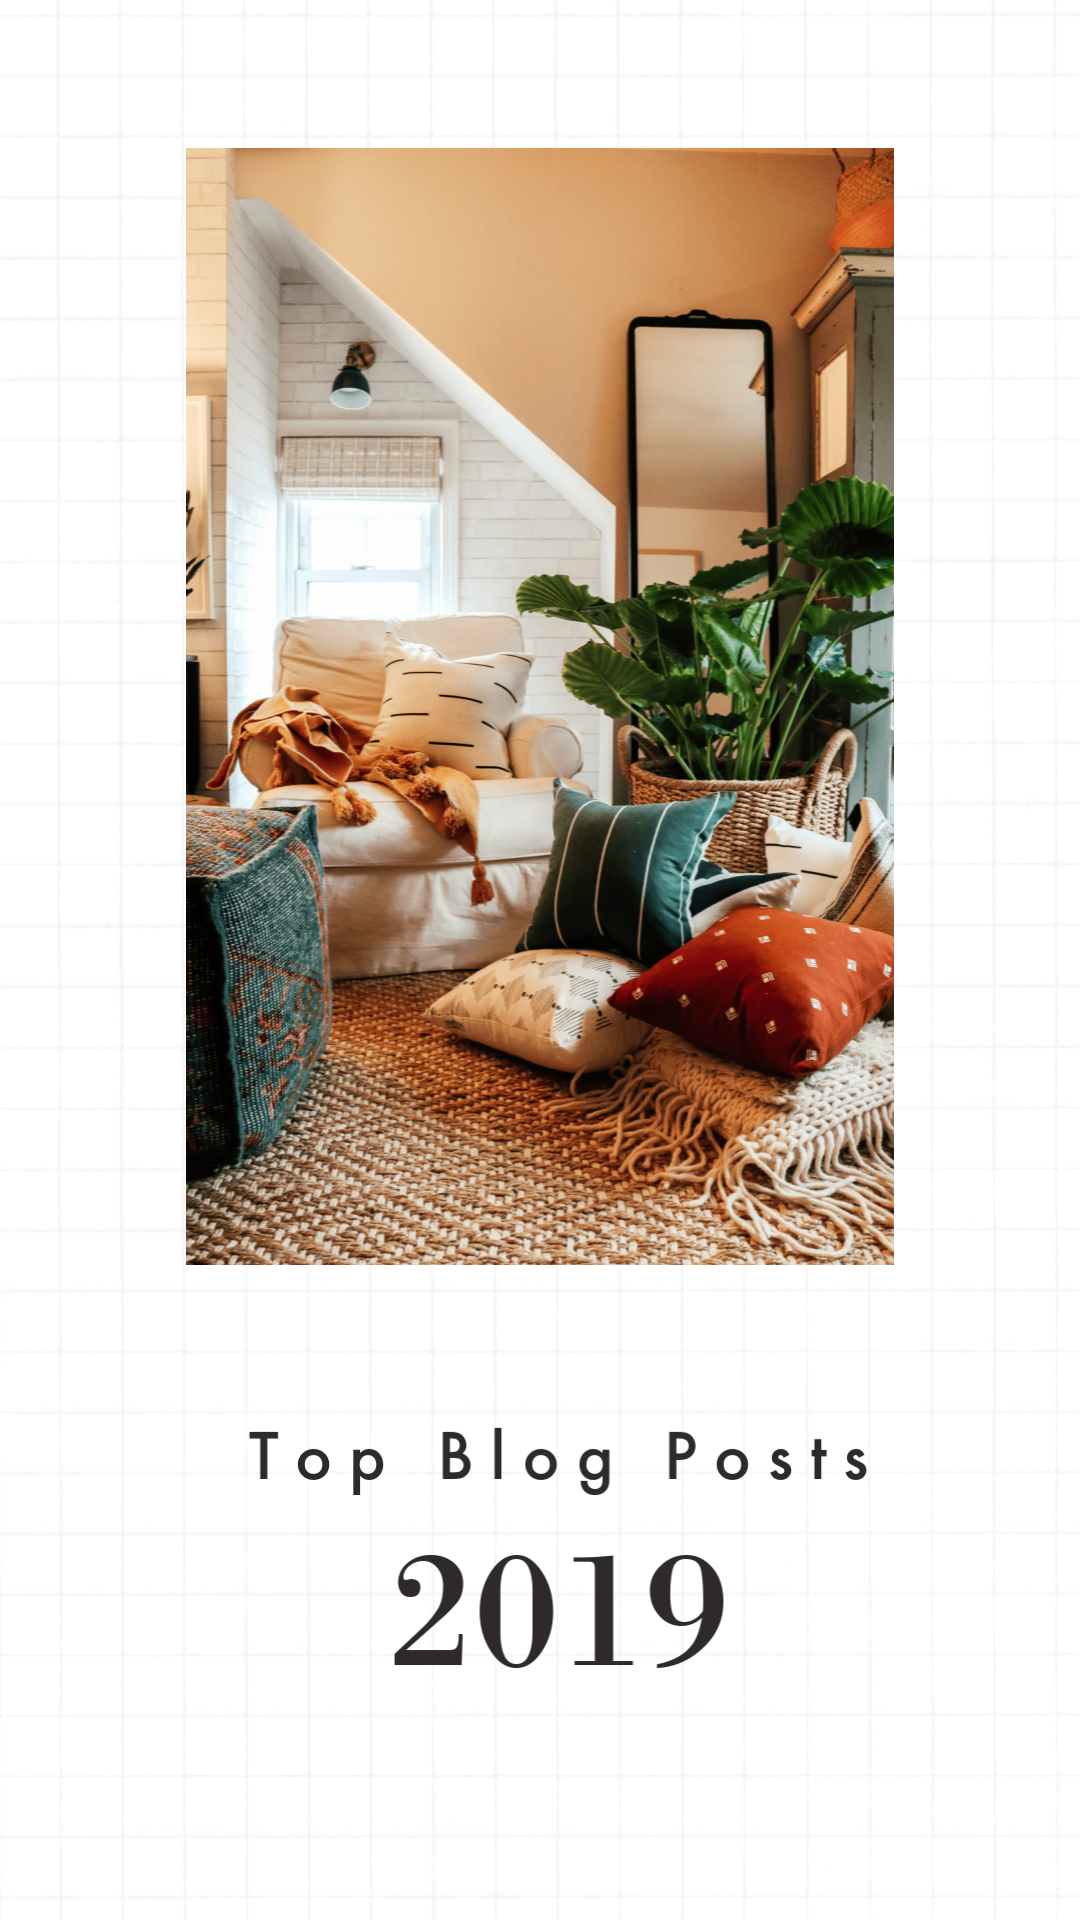 Top Blog Posts in 2019 and Top Sold Items